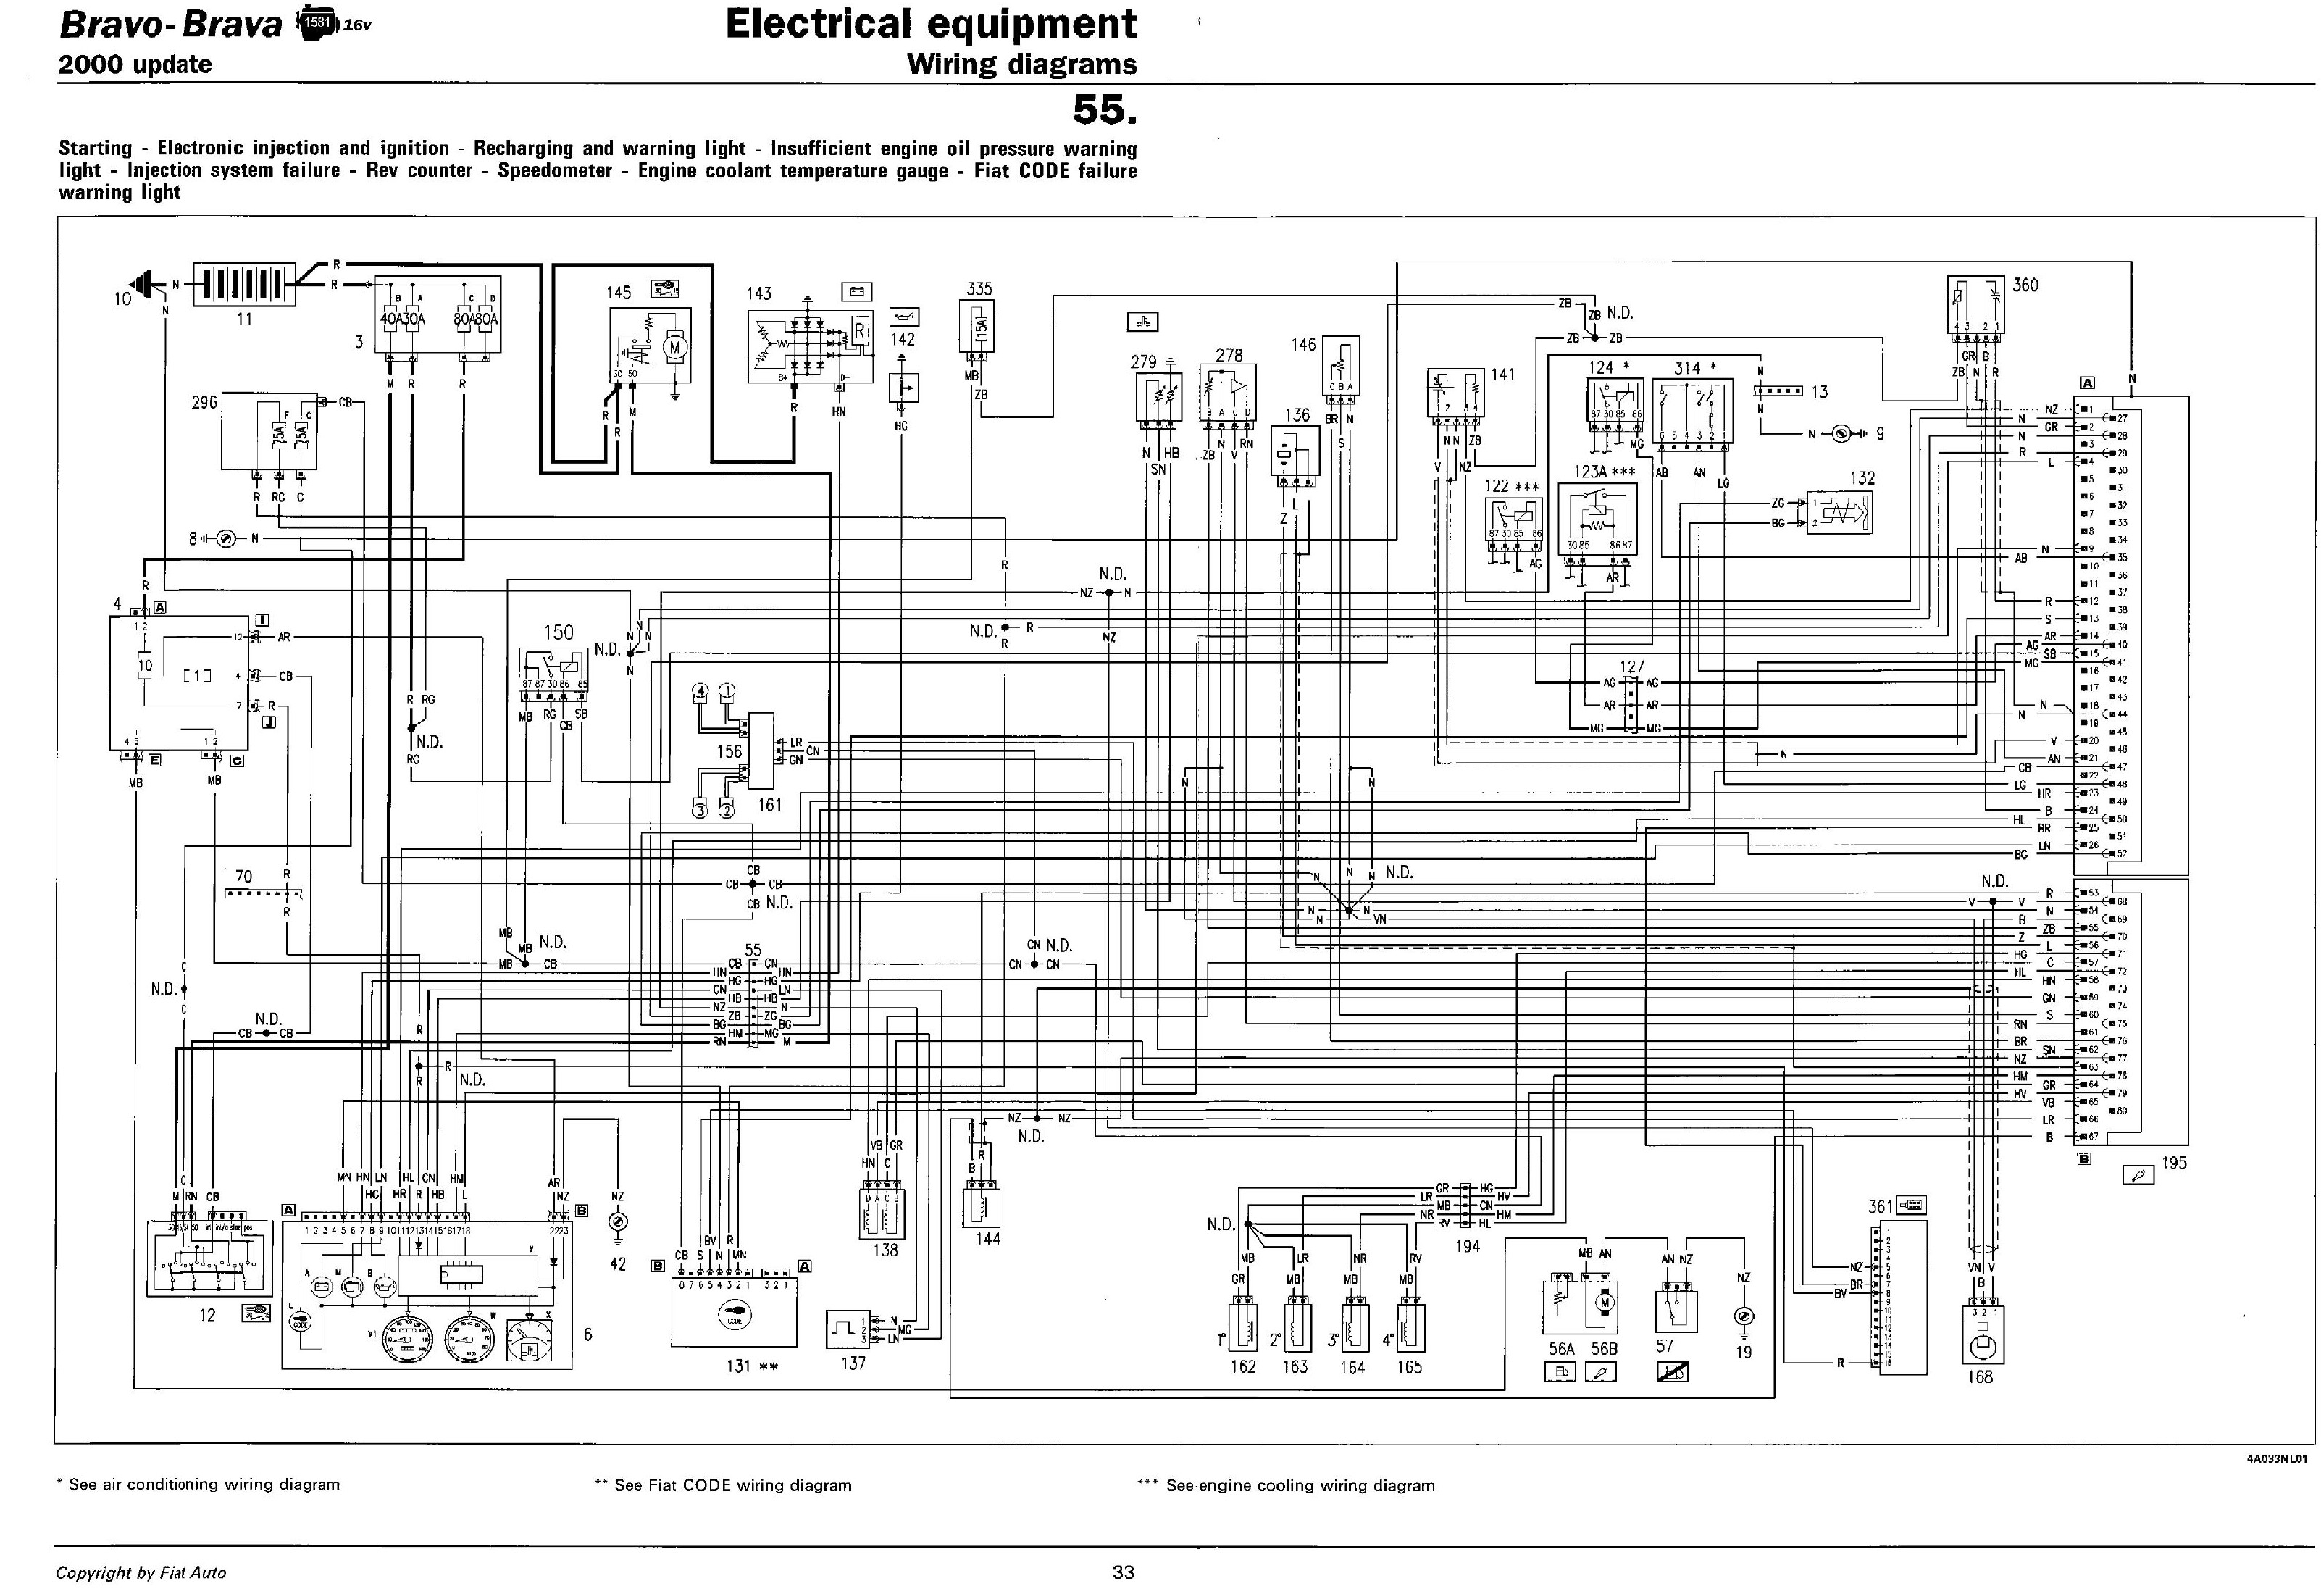 [DIAGRAM] 1973 Fiat 128 Wiring Diagram In Color FULL Version HD Quality